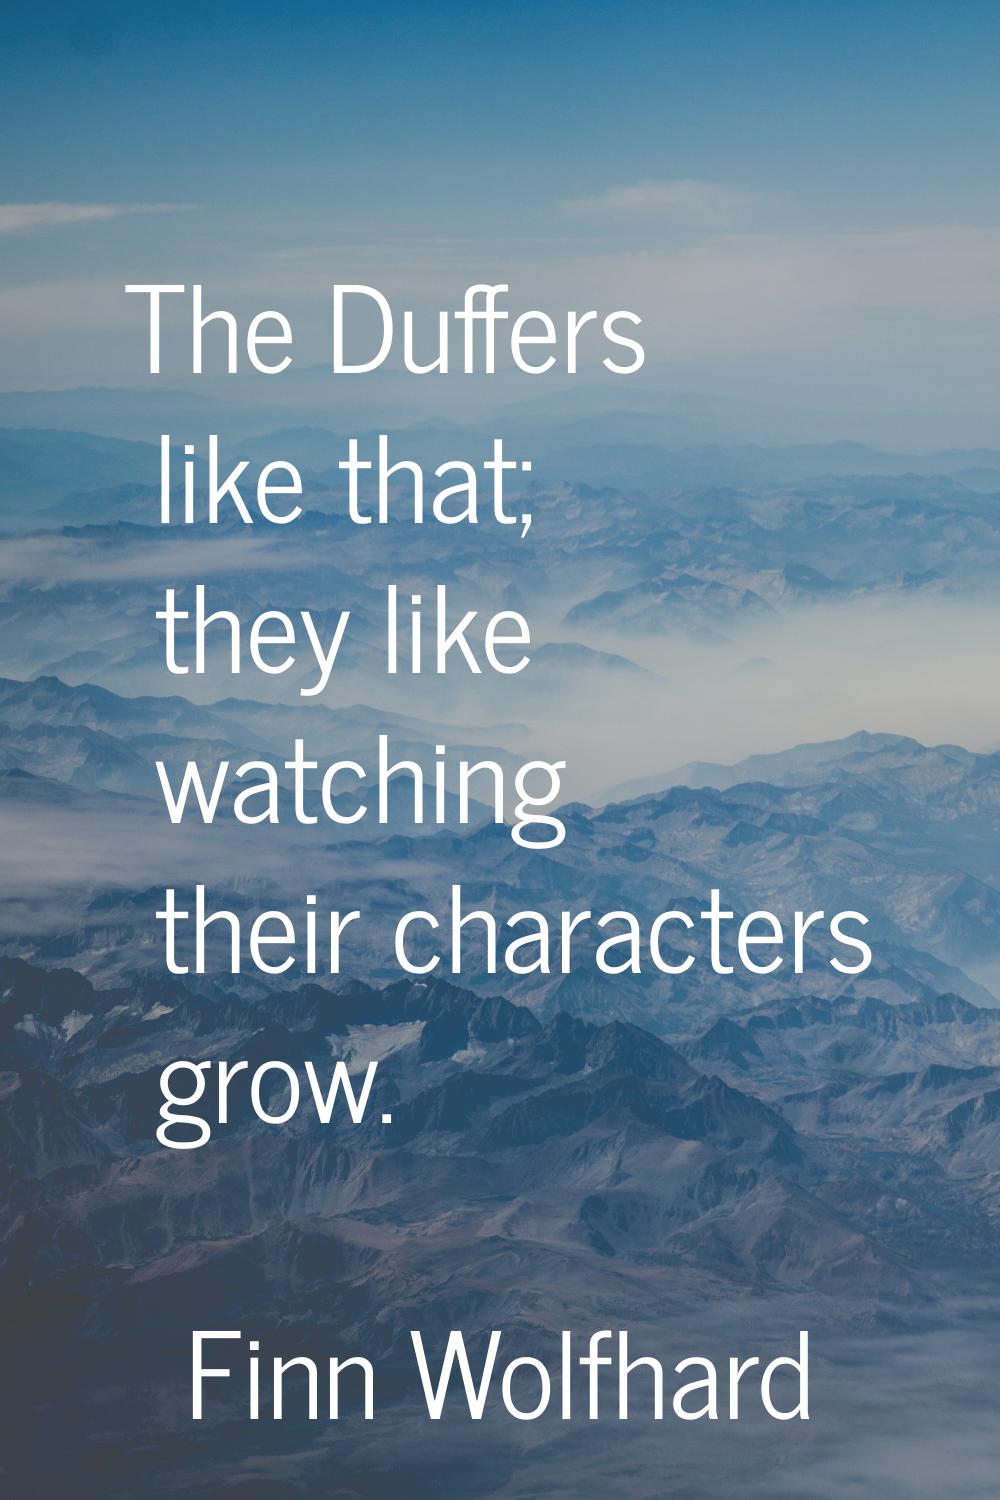 The Duffers like that; they like watching their characters grow.